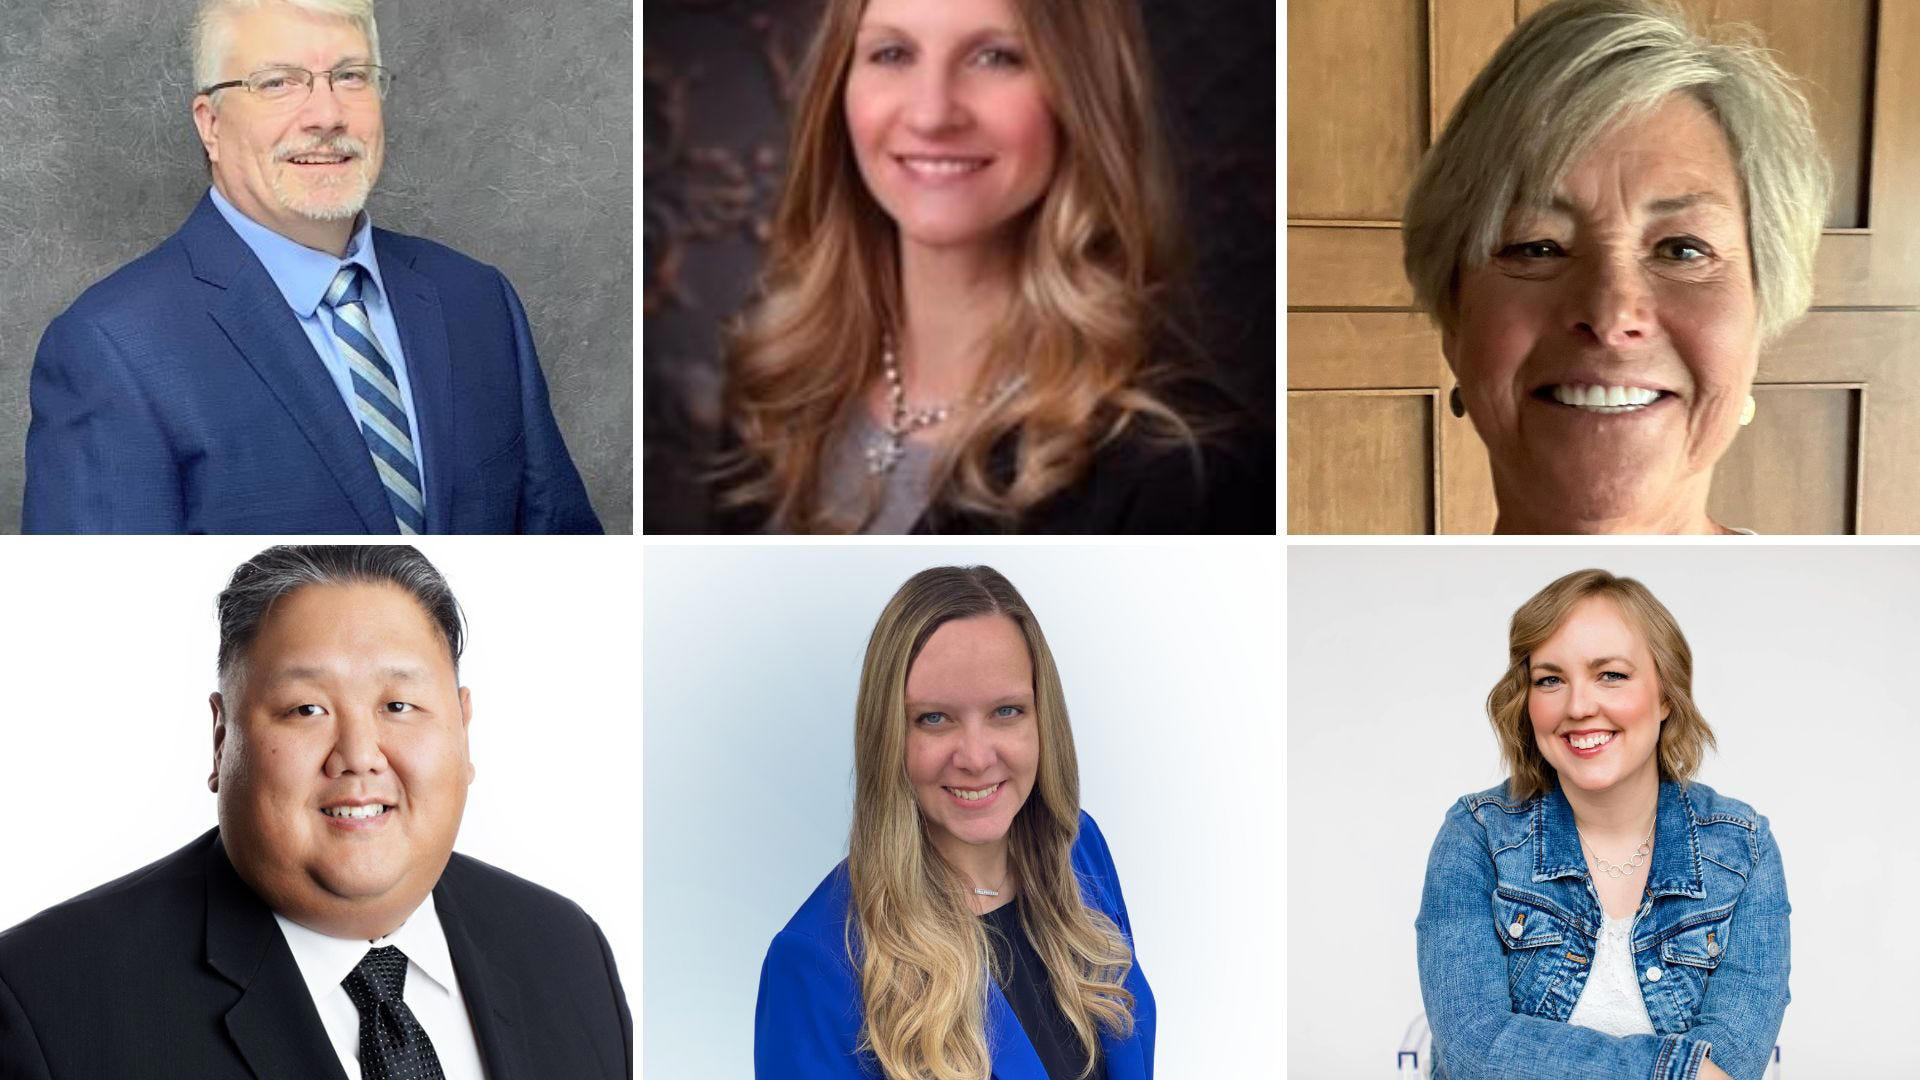 Meet the six candidates running for Urbandale School Board in the 2023